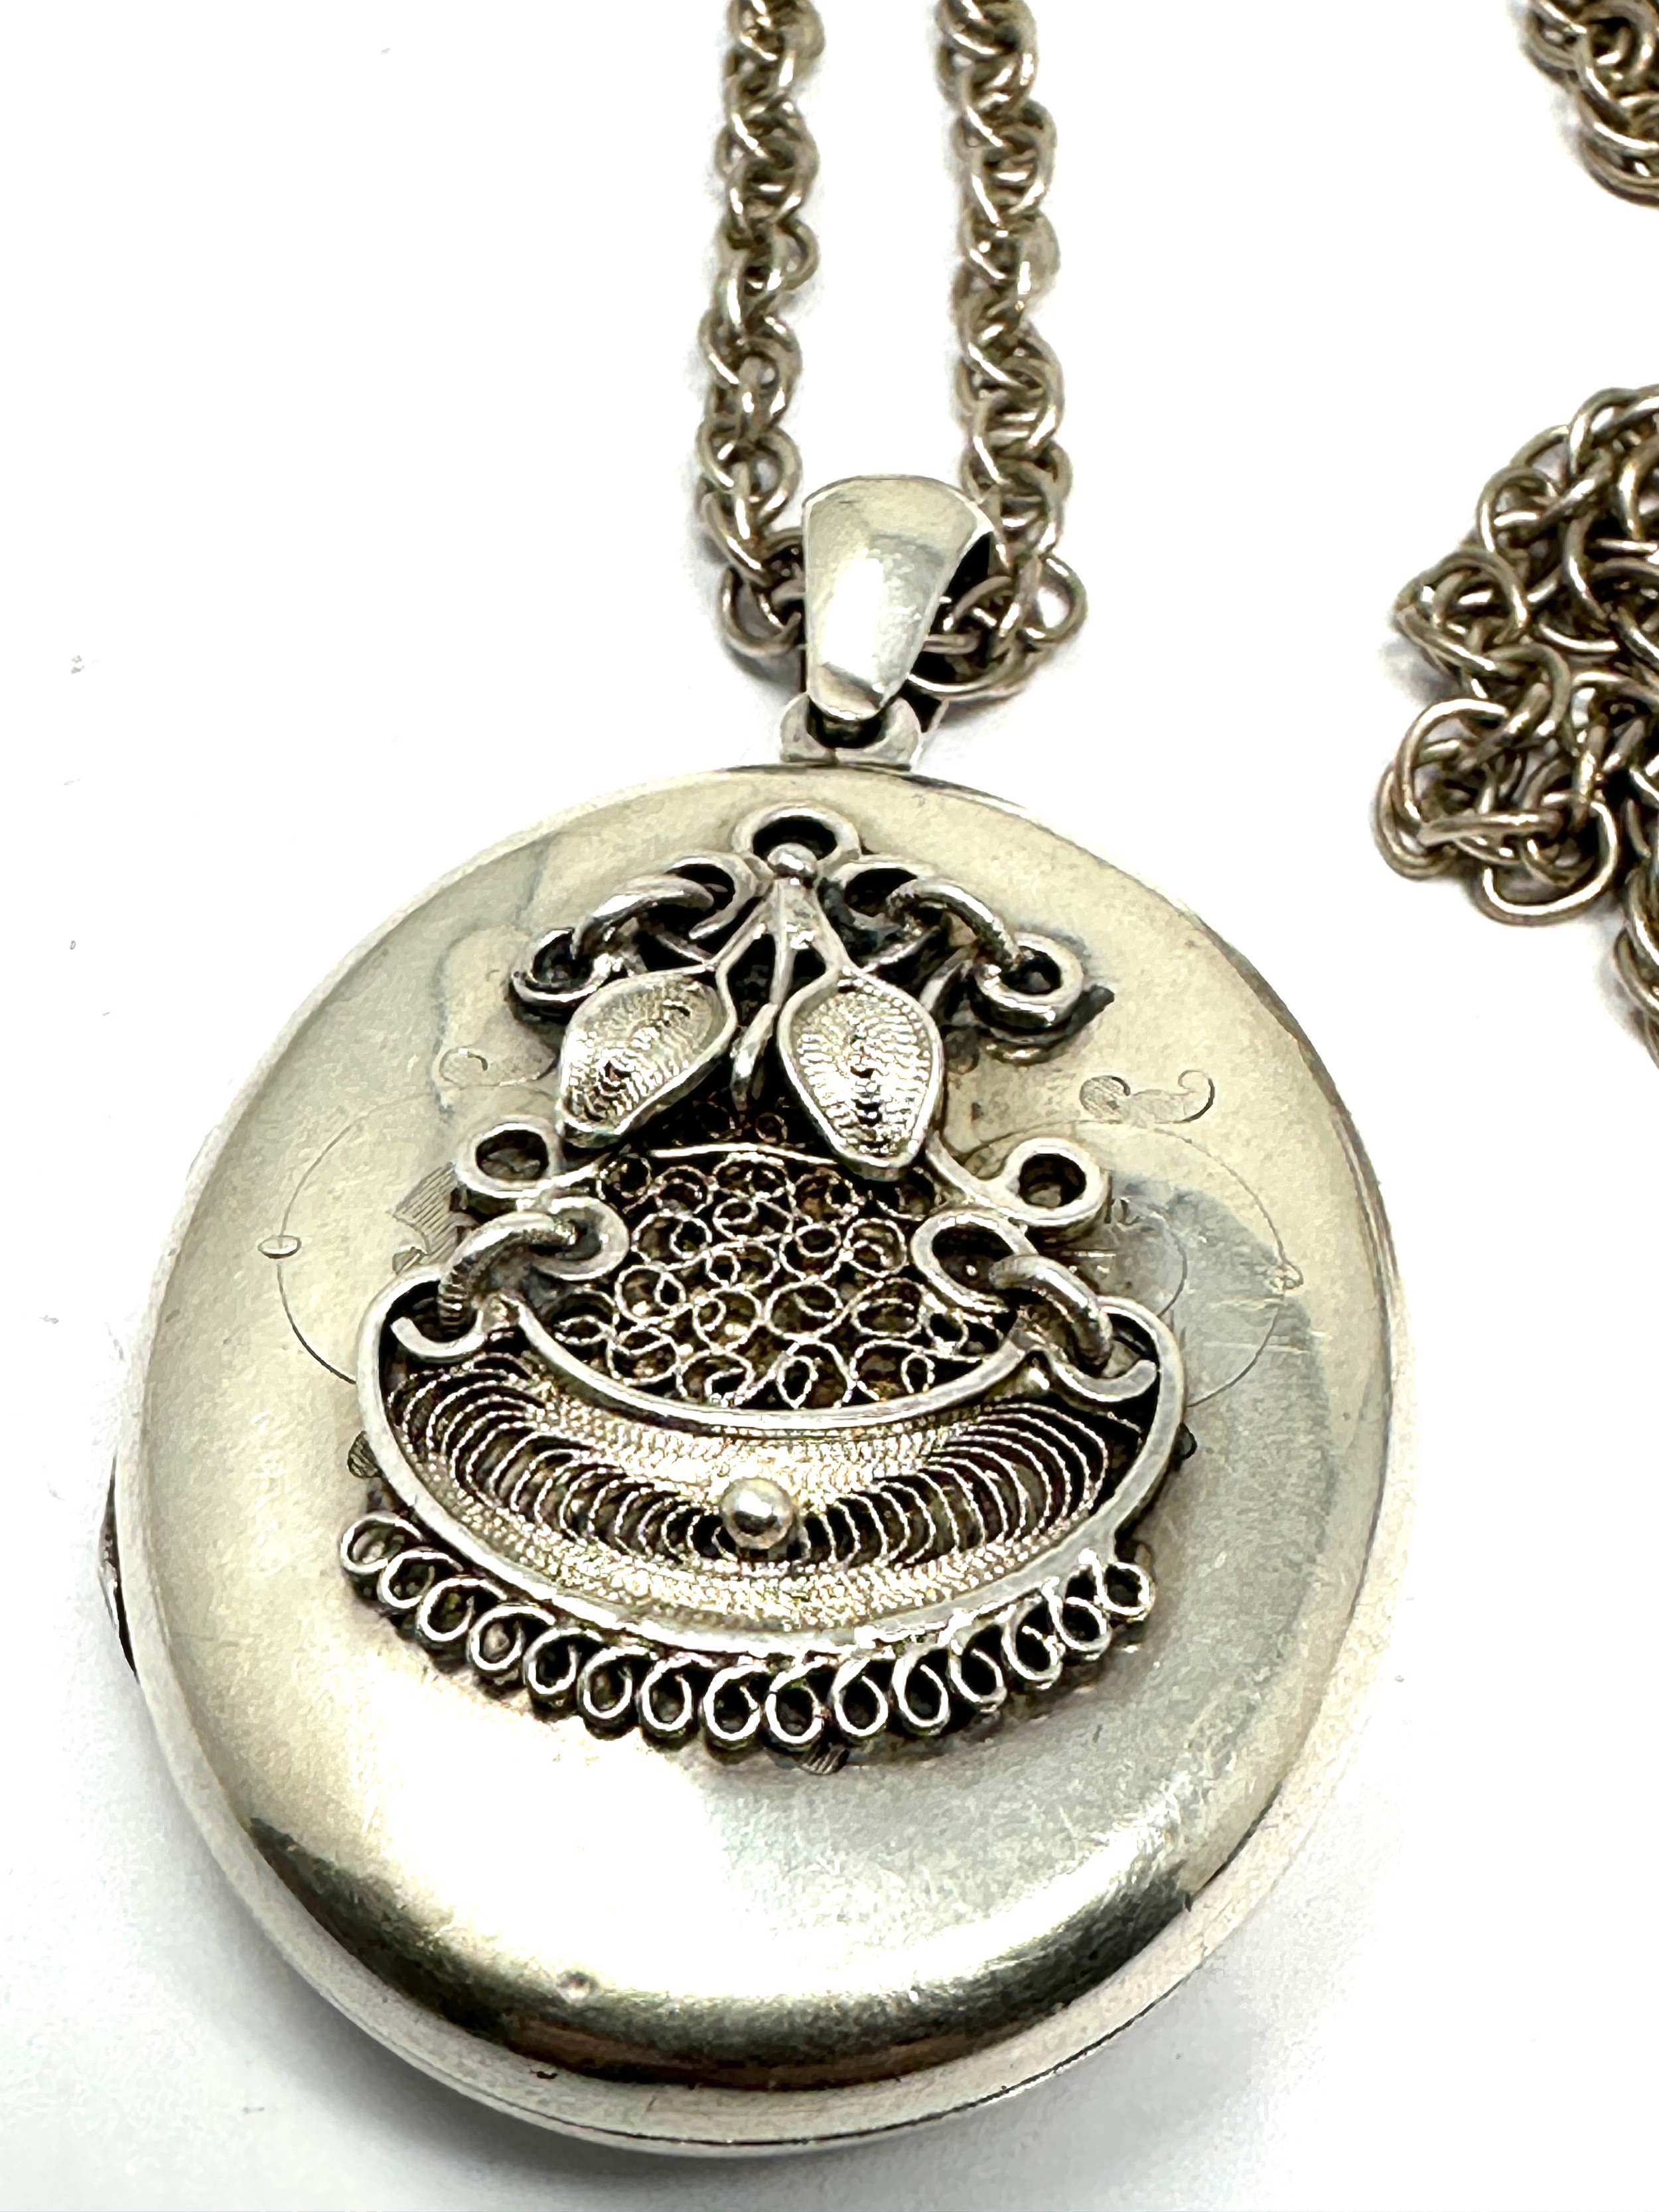 Large Vintage silver locket and chain weight 35g - Image 2 of 3